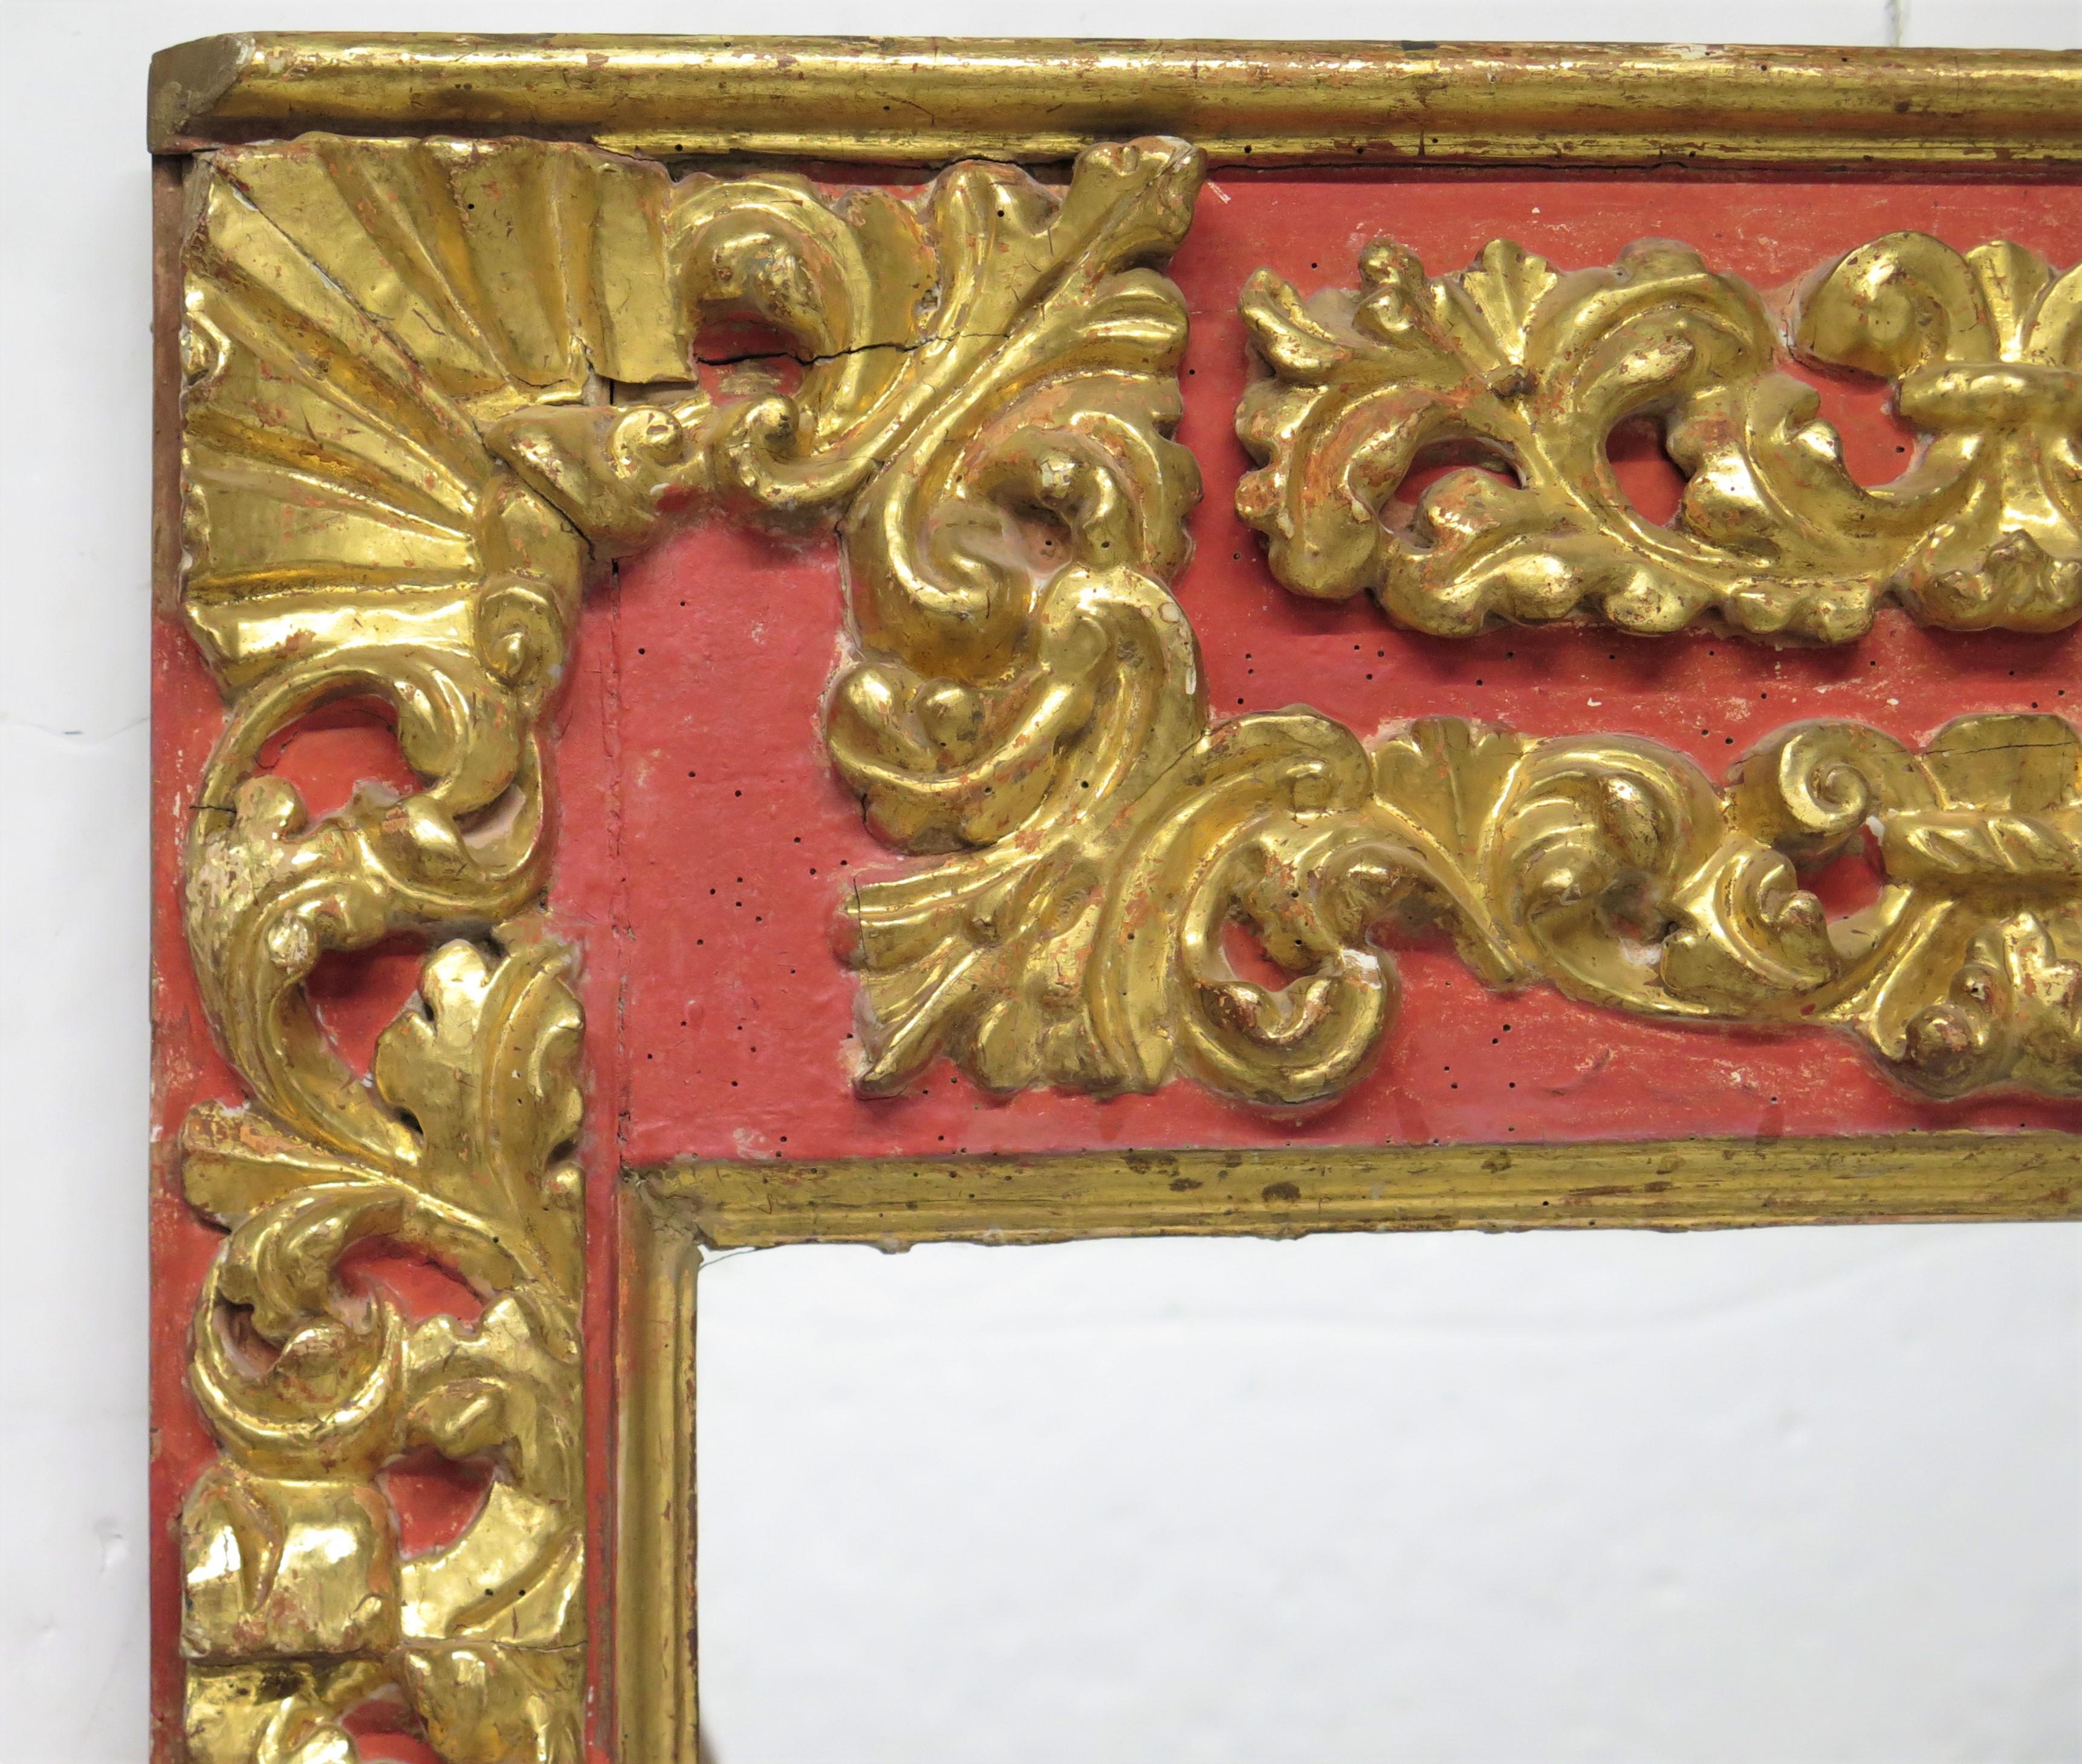 a pair of large hand-carved and gilded Spanish Colonial / Baroque mirrors each with flat mirror plate, putti heads each side, red   

MEASUREMENTS:

62